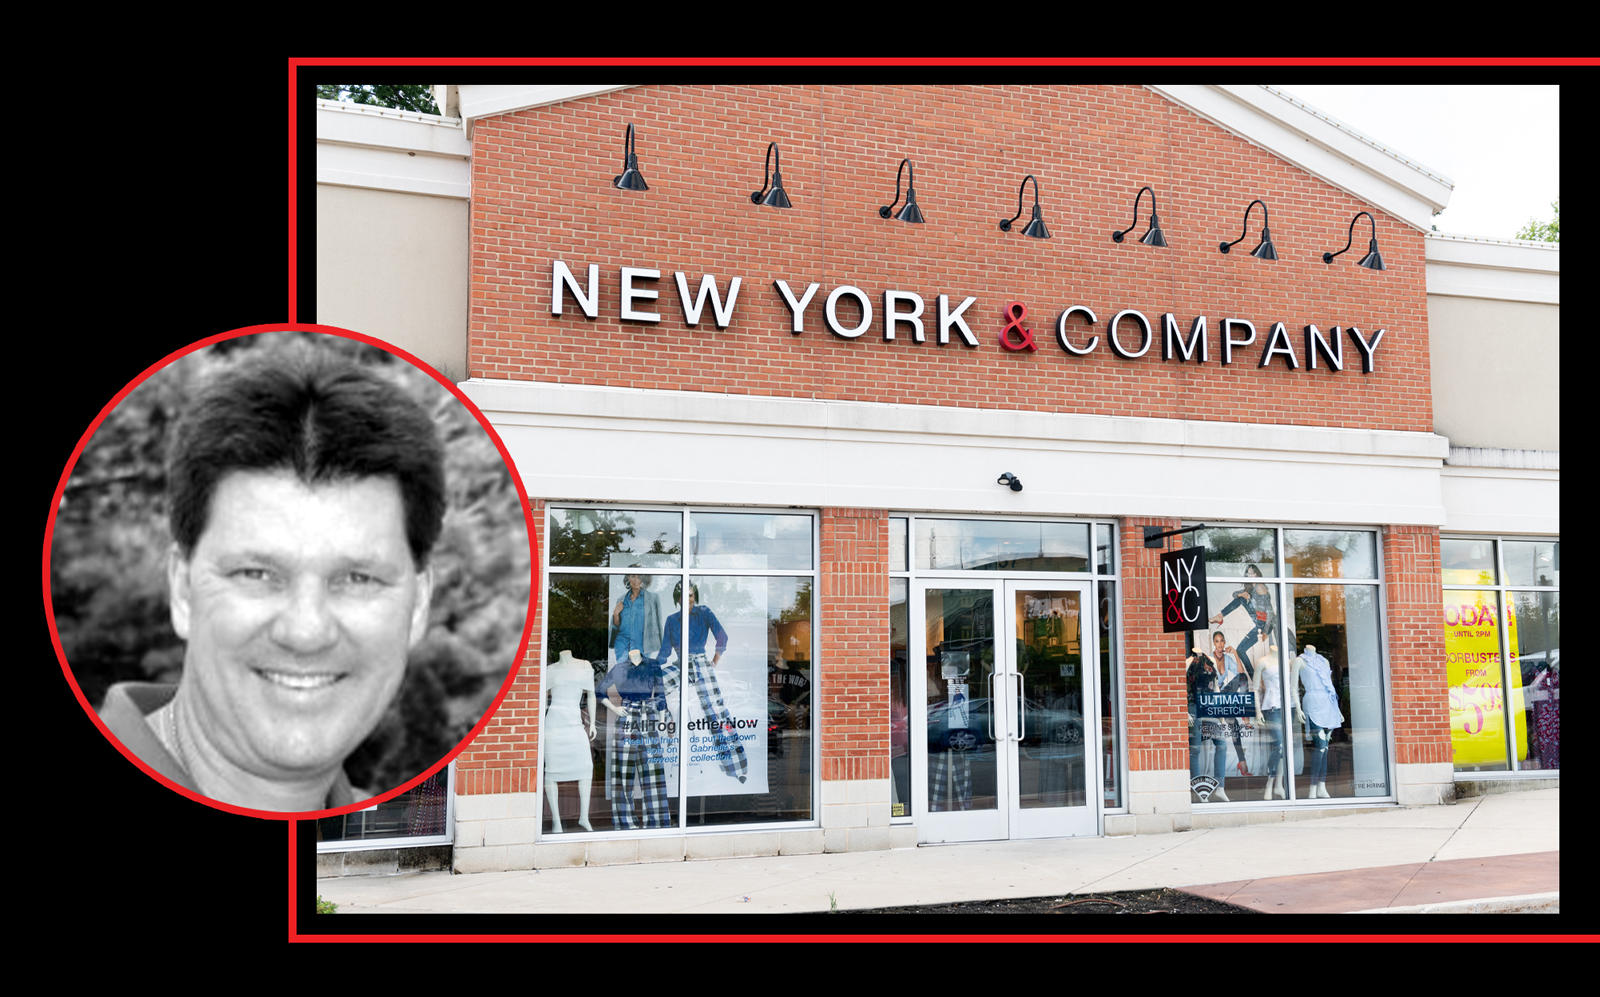 RTW Retailwinds CEO and CFO Sheamus Toal and a New York & Company store (Getty, LinkedIn)